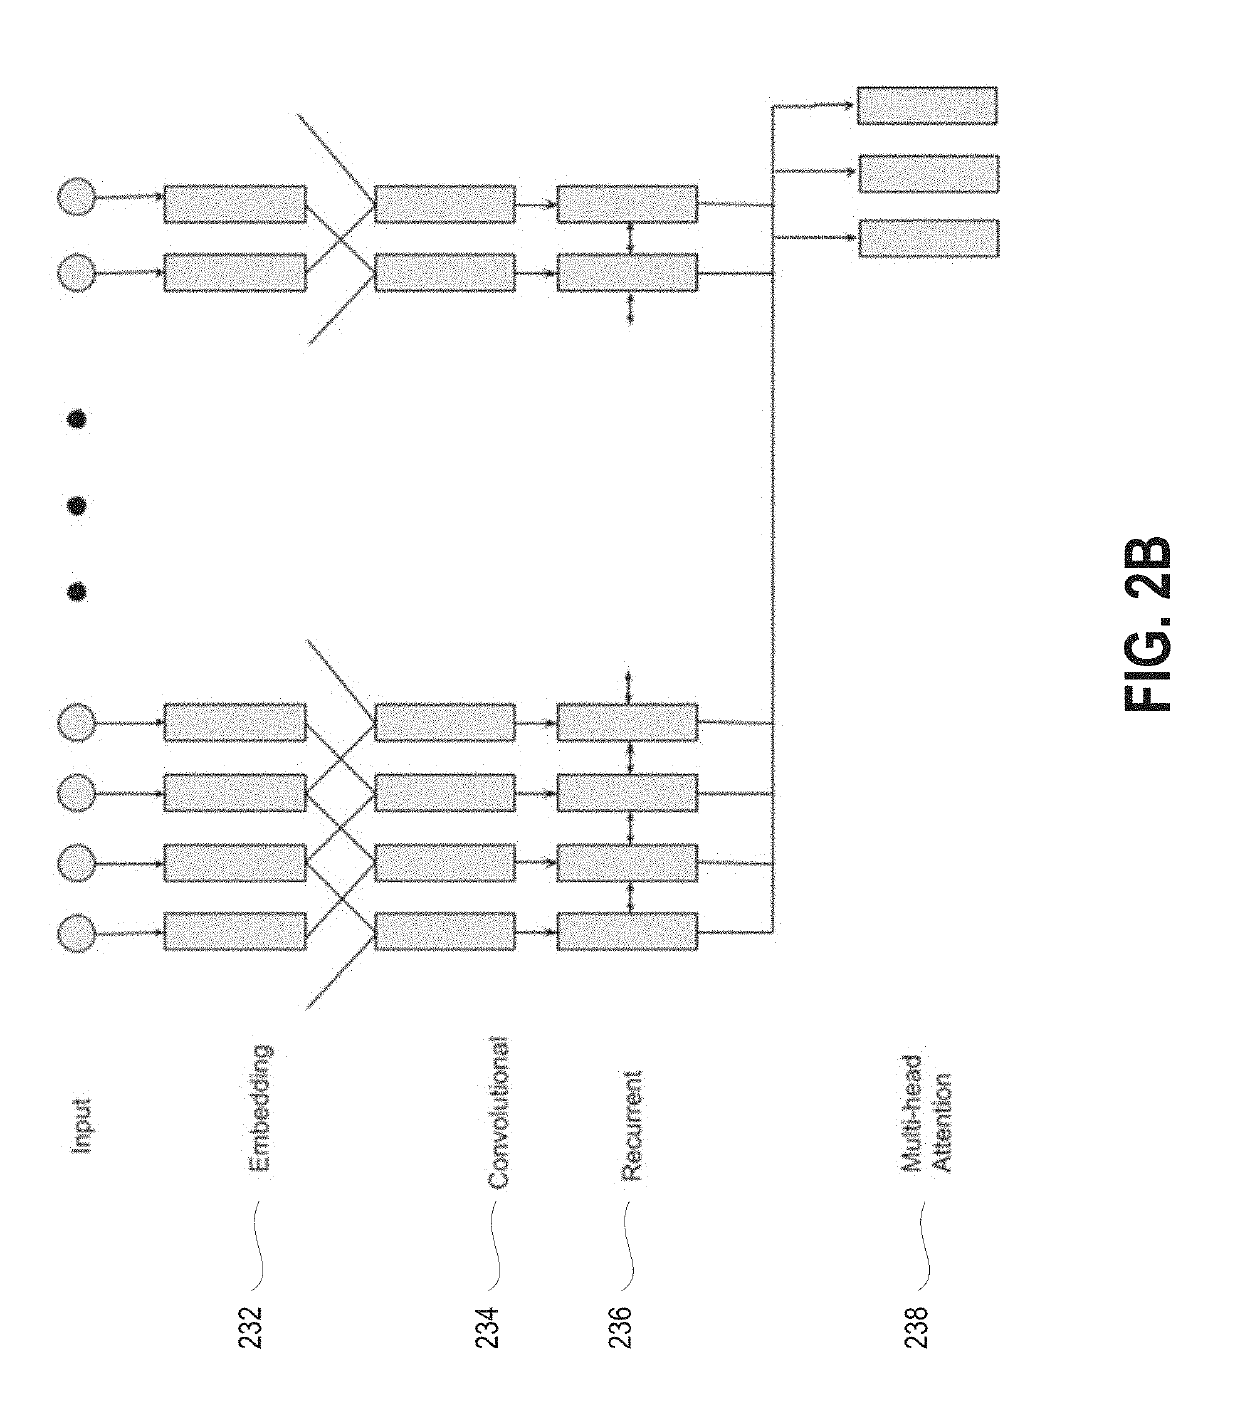 System and method for dynamic online search result generation